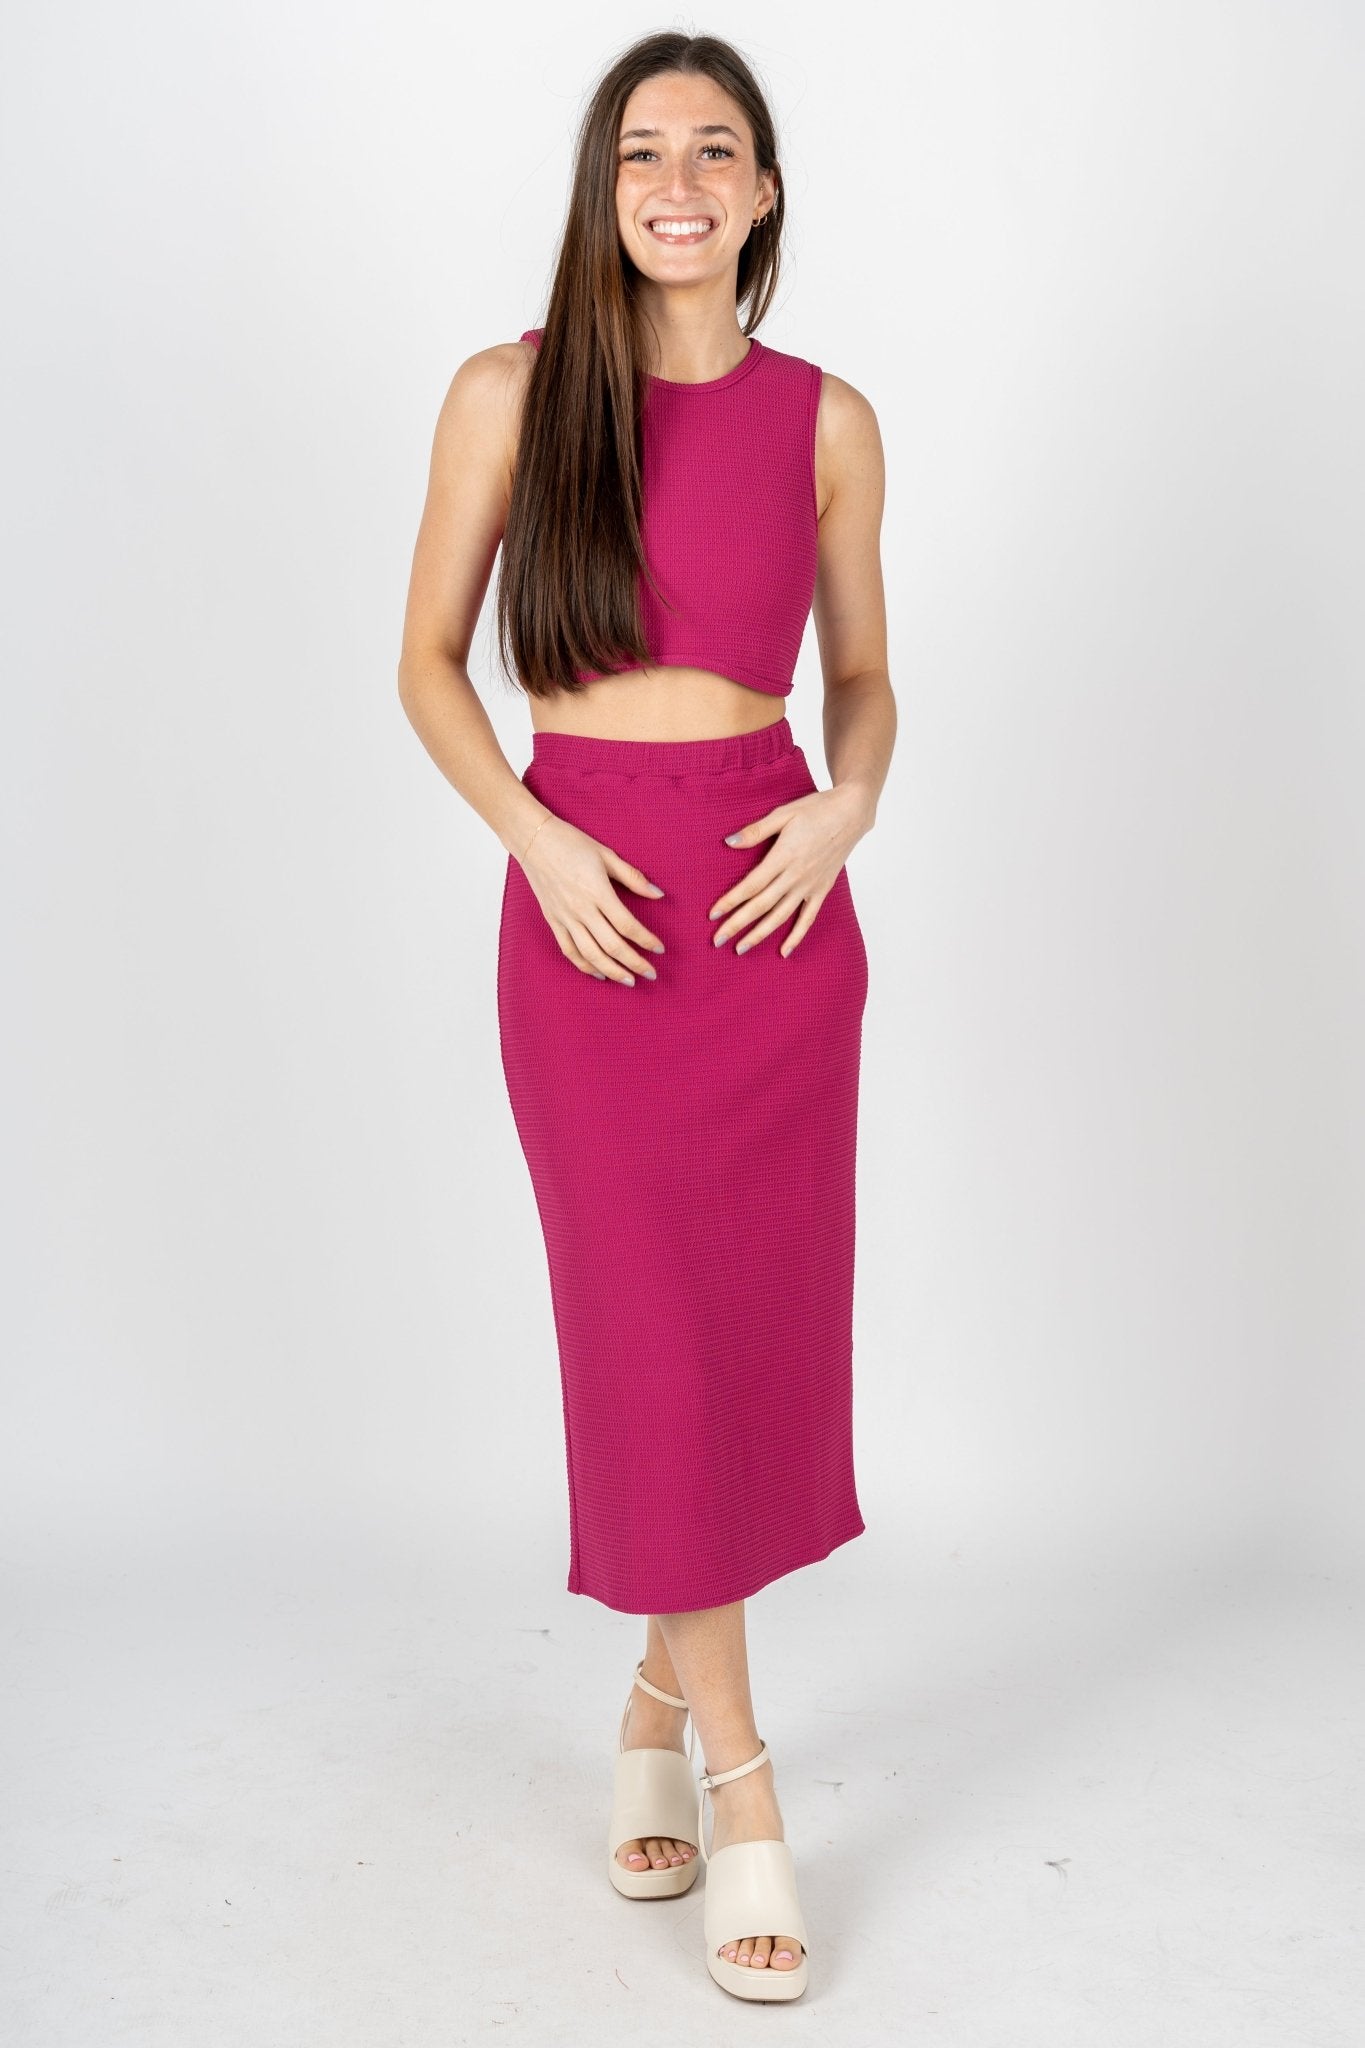 Knit cropped tank top magenta - Trendy Top - Fashion Tank Tops at Lush Fashion Lounge Boutique in Oklahoma City